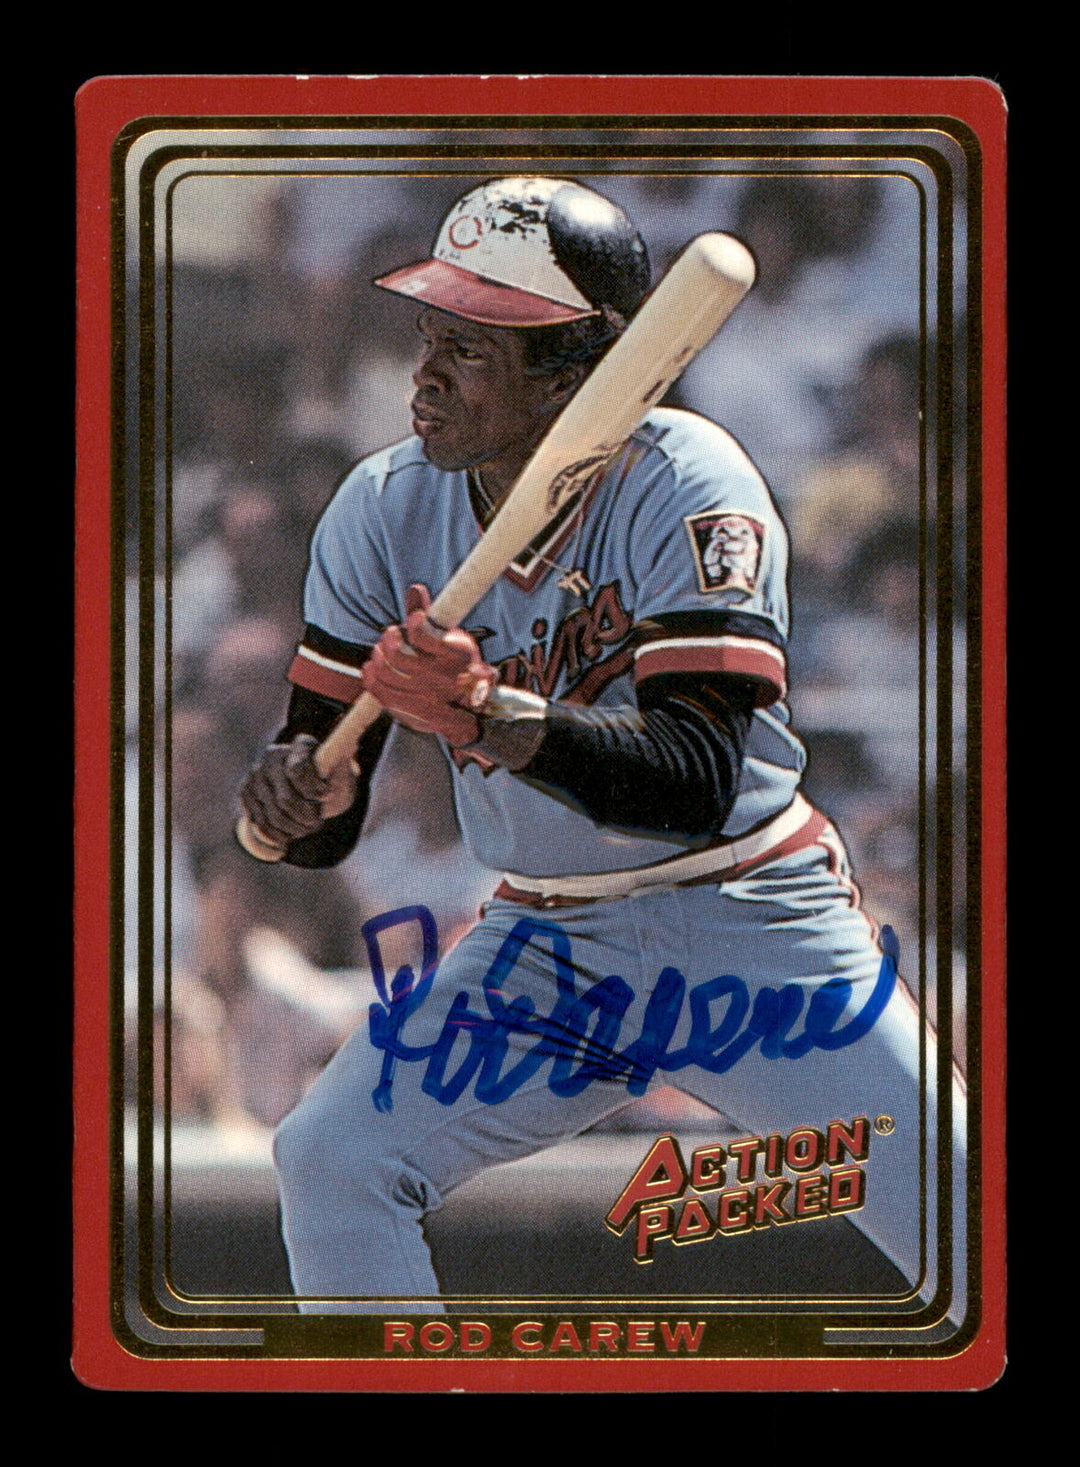 Rod Carew Autographed Signed 1993 Action Packed Card #128 Minnesota Twins 186749 Image 1